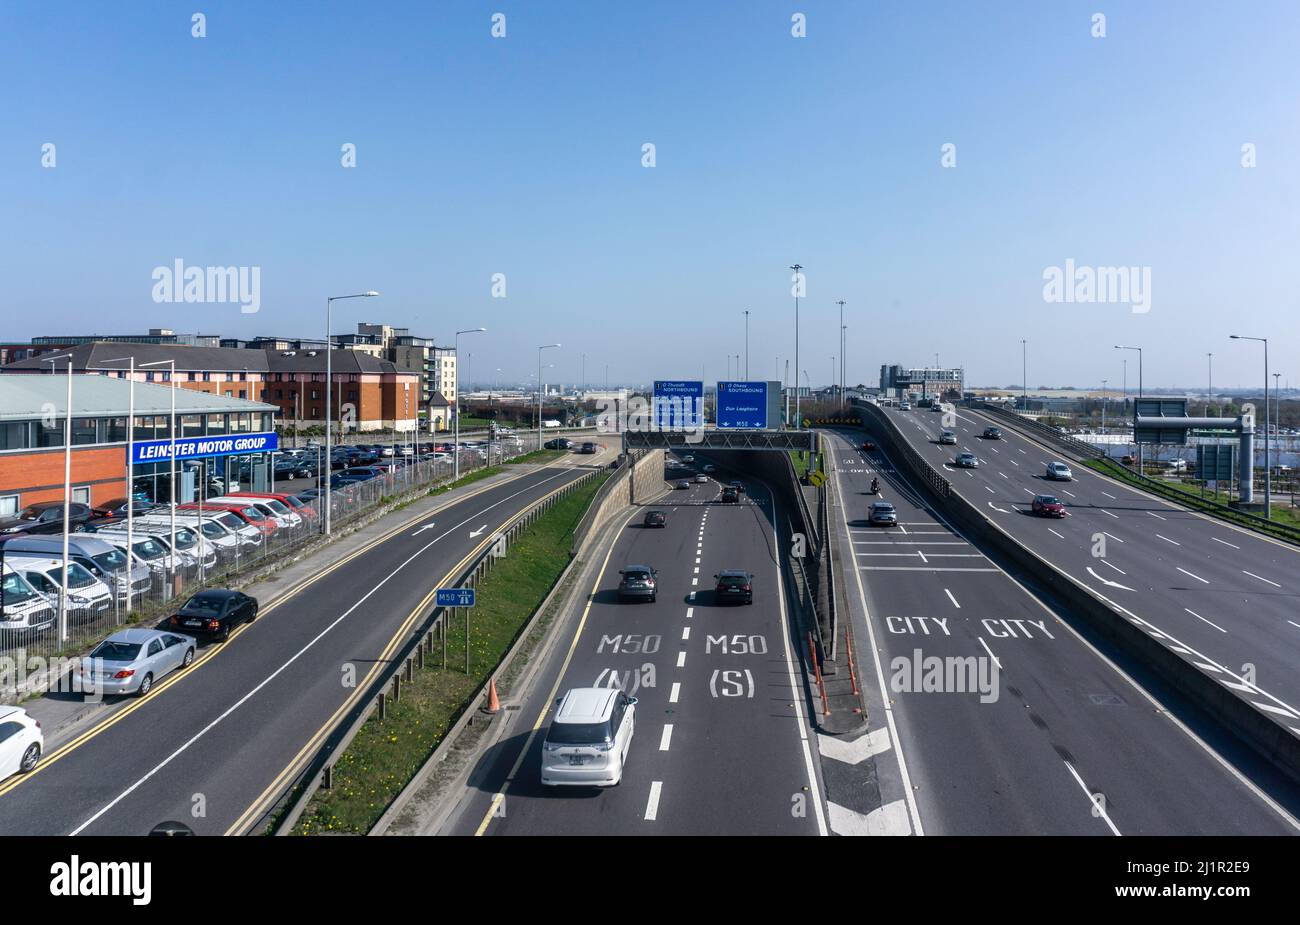 The Red Cow Interchange, Dublin, Ireland comprising of links leading to major routes in Ireland. Stock Photo